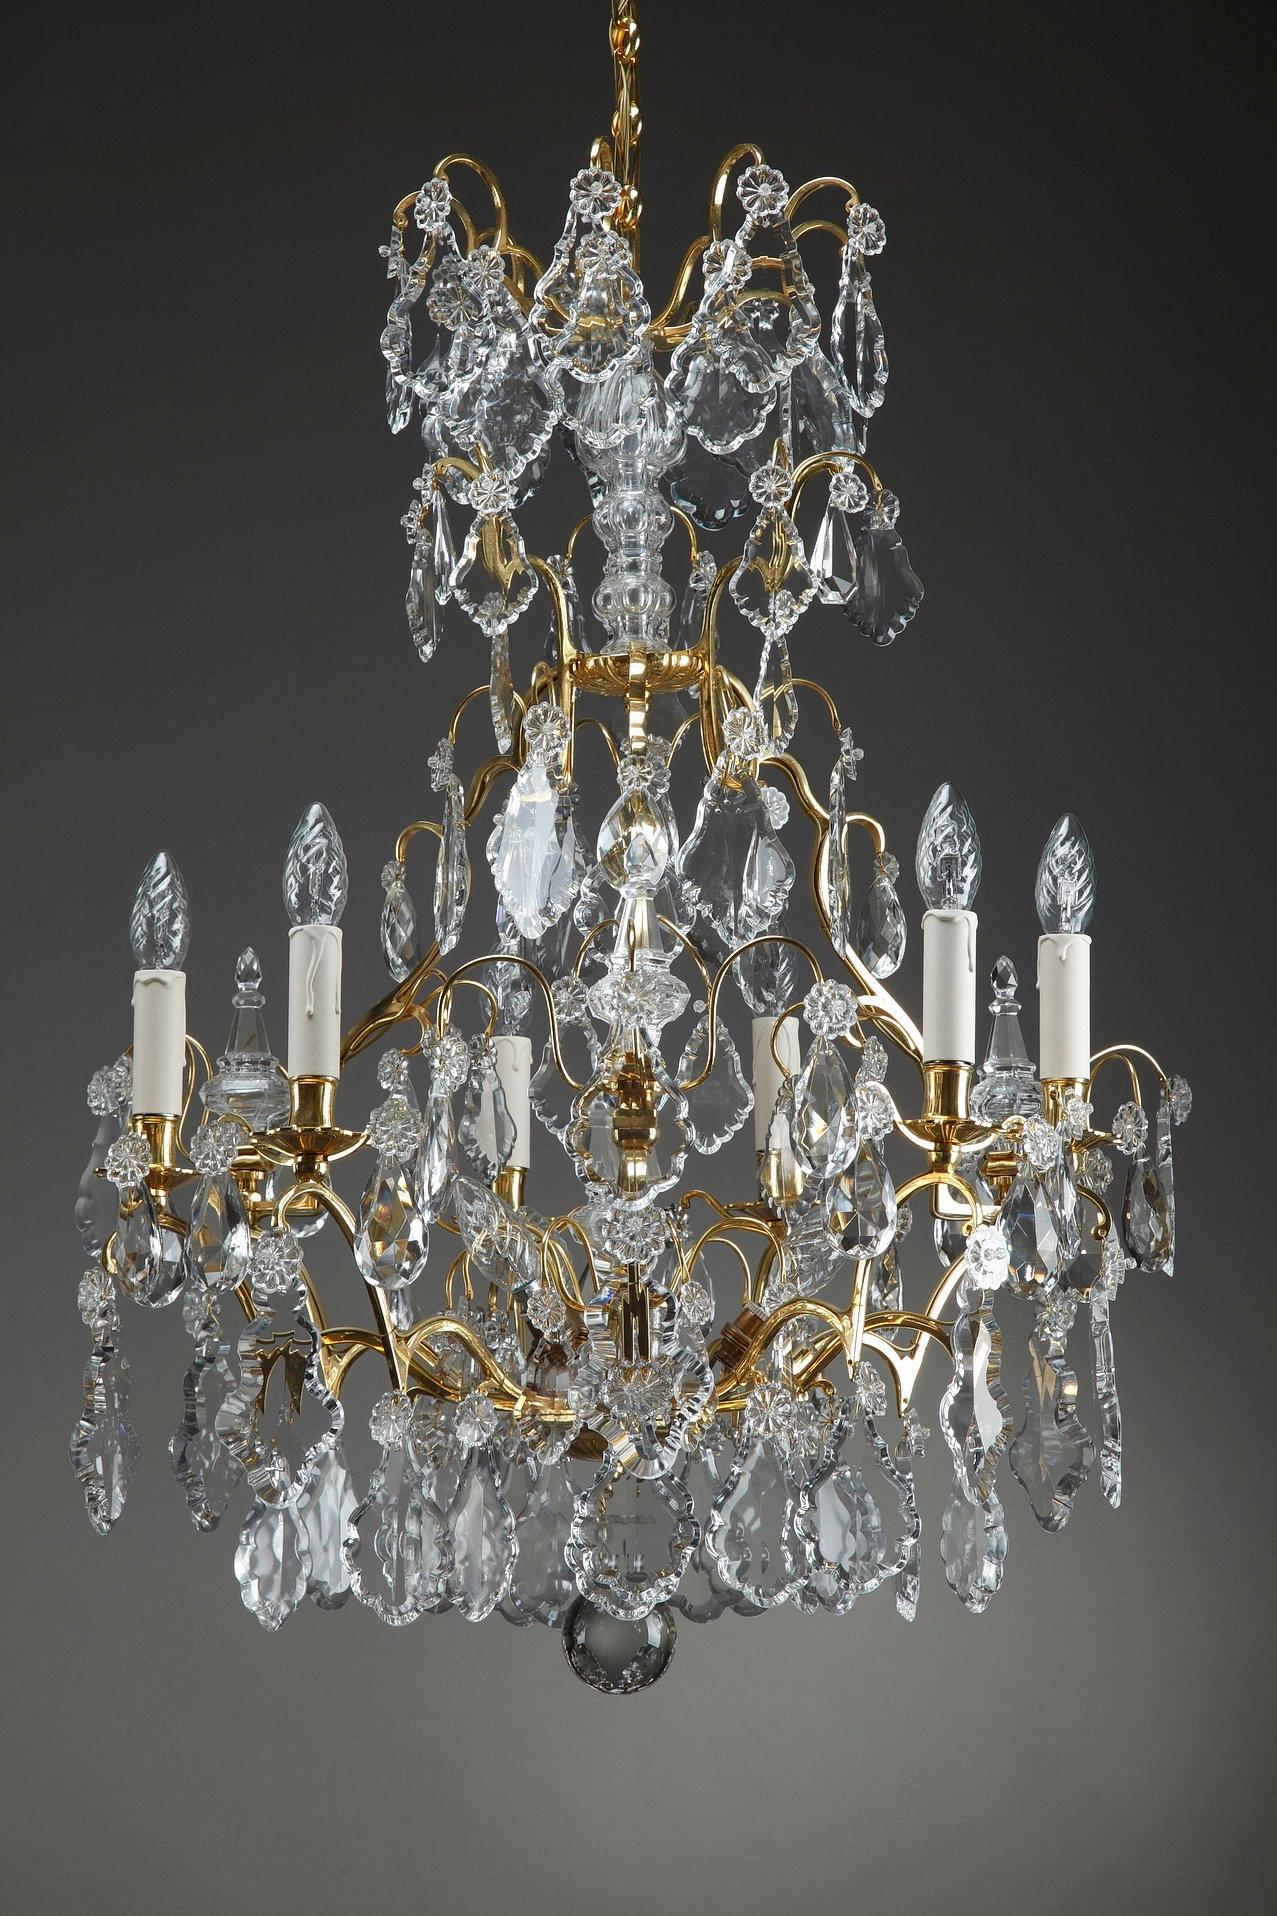 This late 19th century crystal chandeliers of large size and opulent decoration is an exquisite antique collectible to behold. It boasts 9 ormolu branches, richly decorated with oversized drops, flowers and daggers in crystal. Each chandelier has a